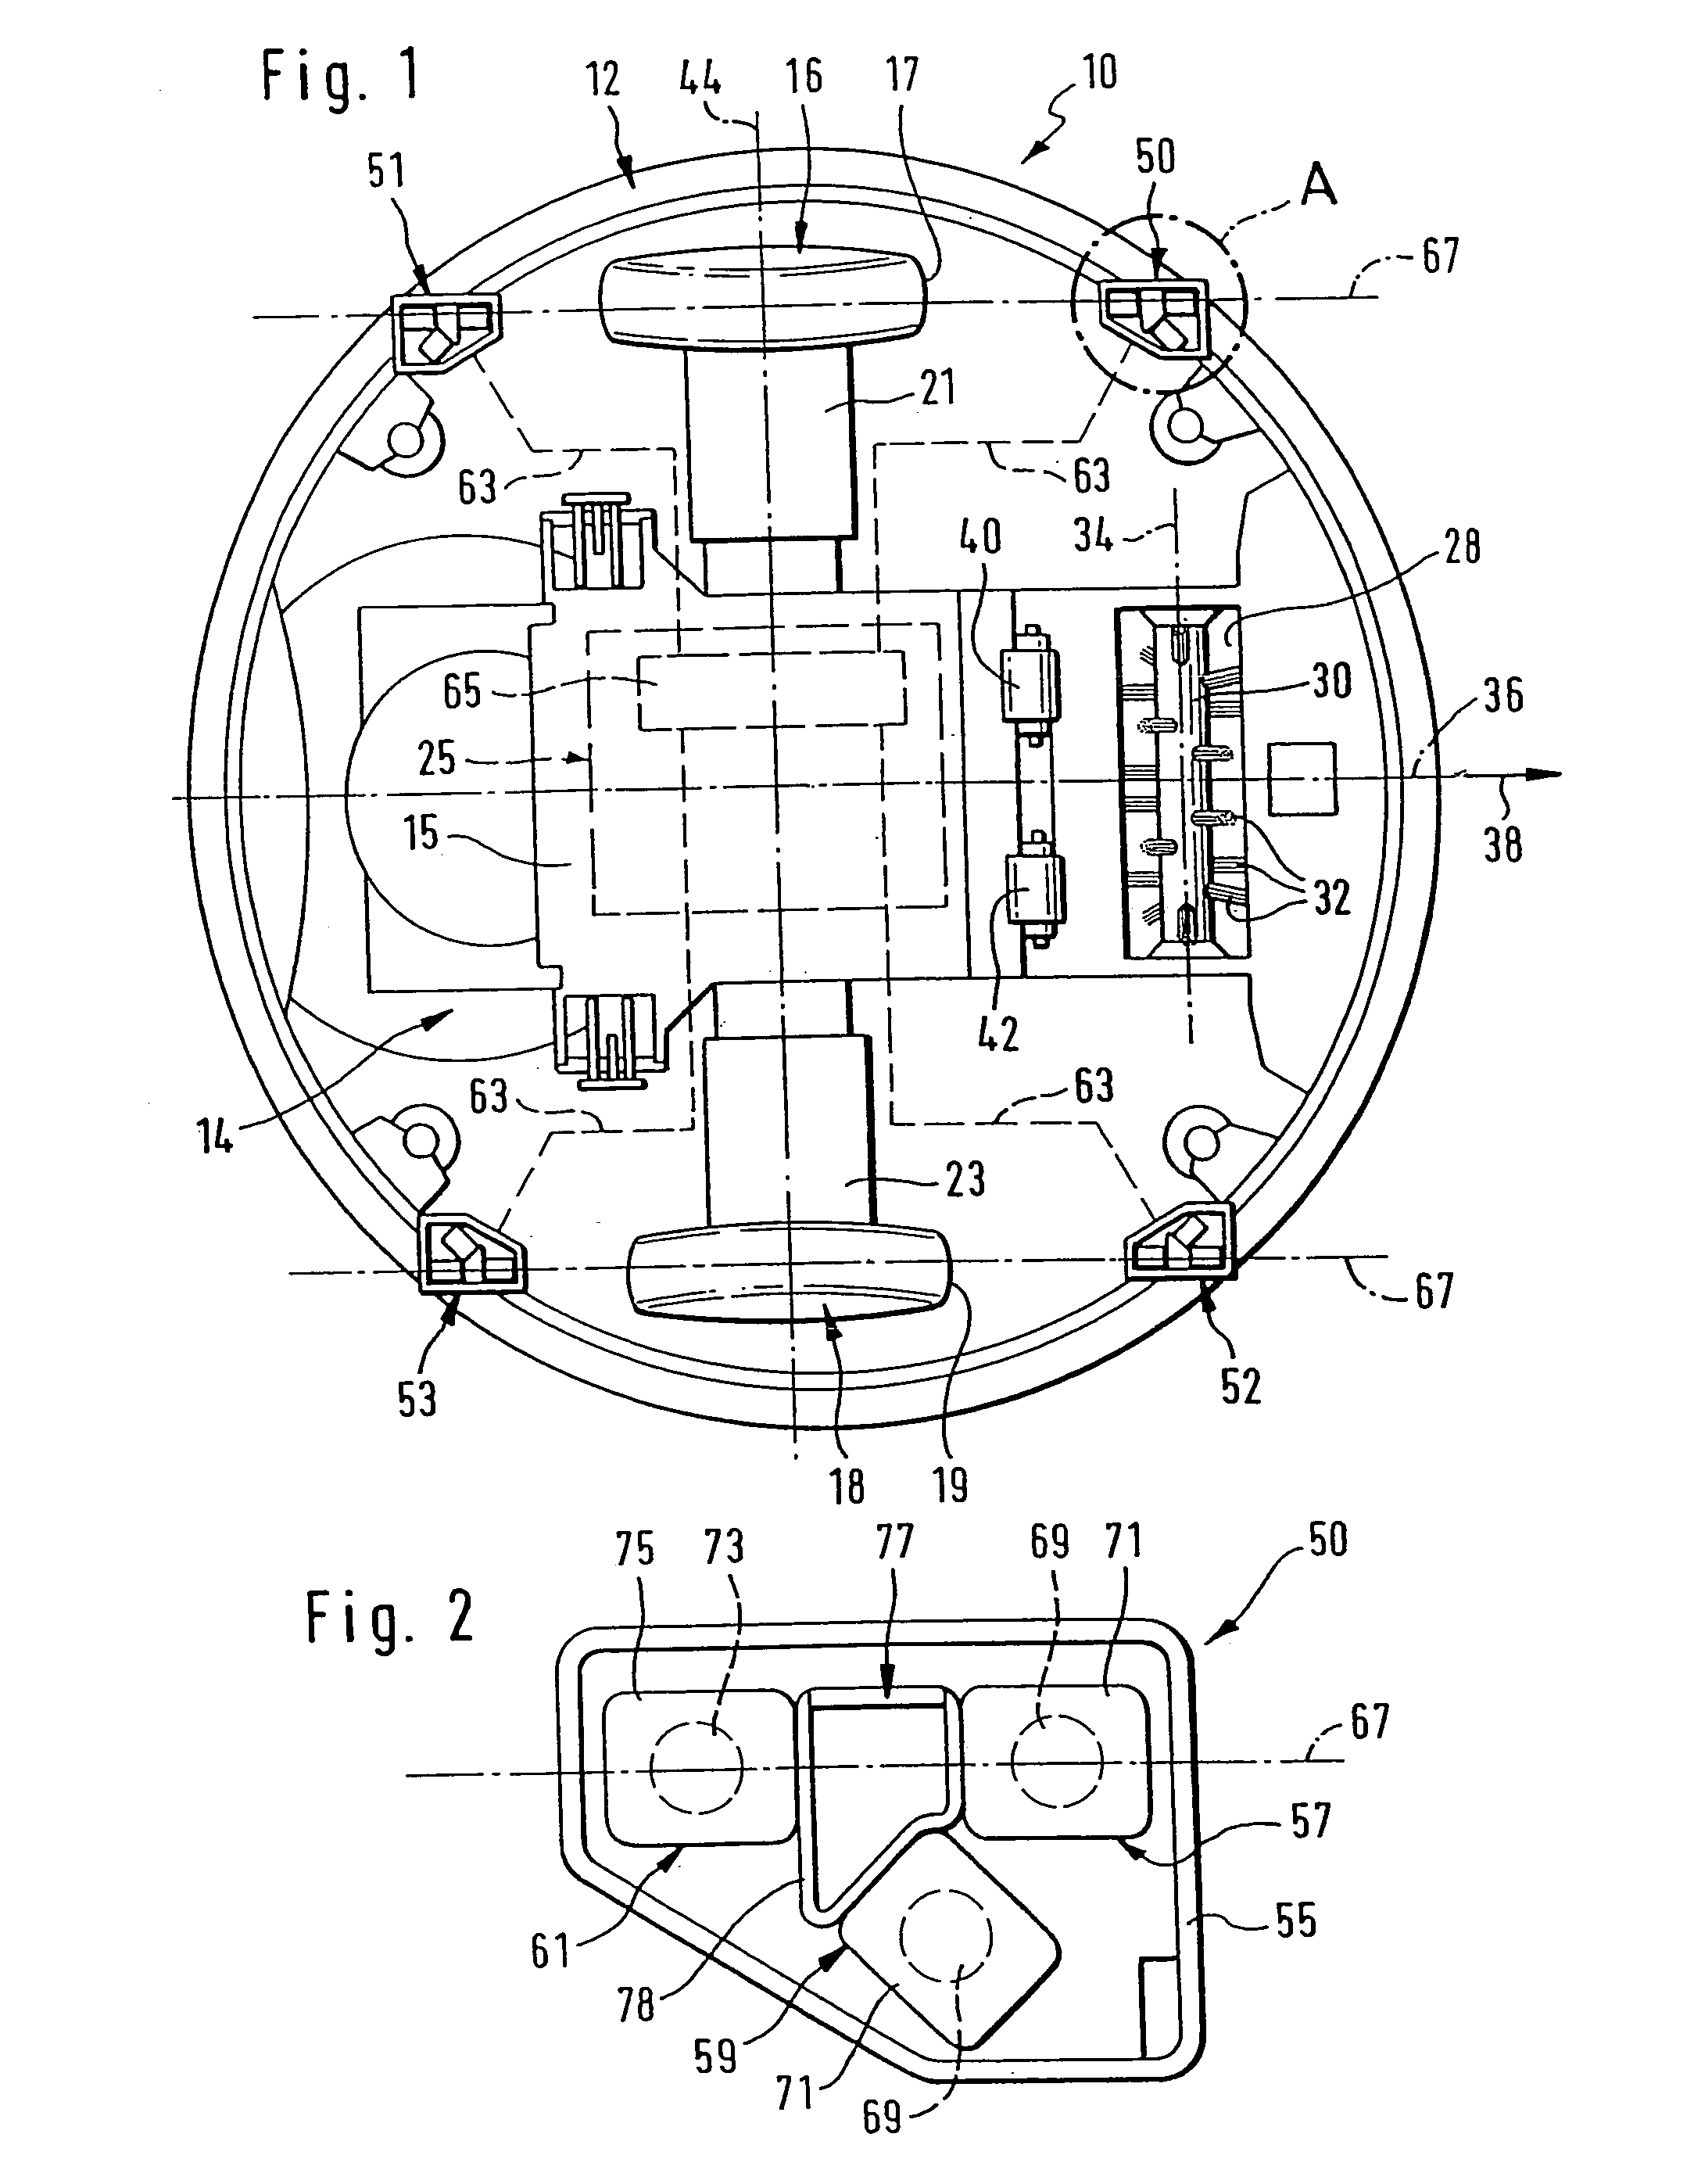 Sensor apparatus and self-propelled floor cleaning appliance having a sensor apparatus